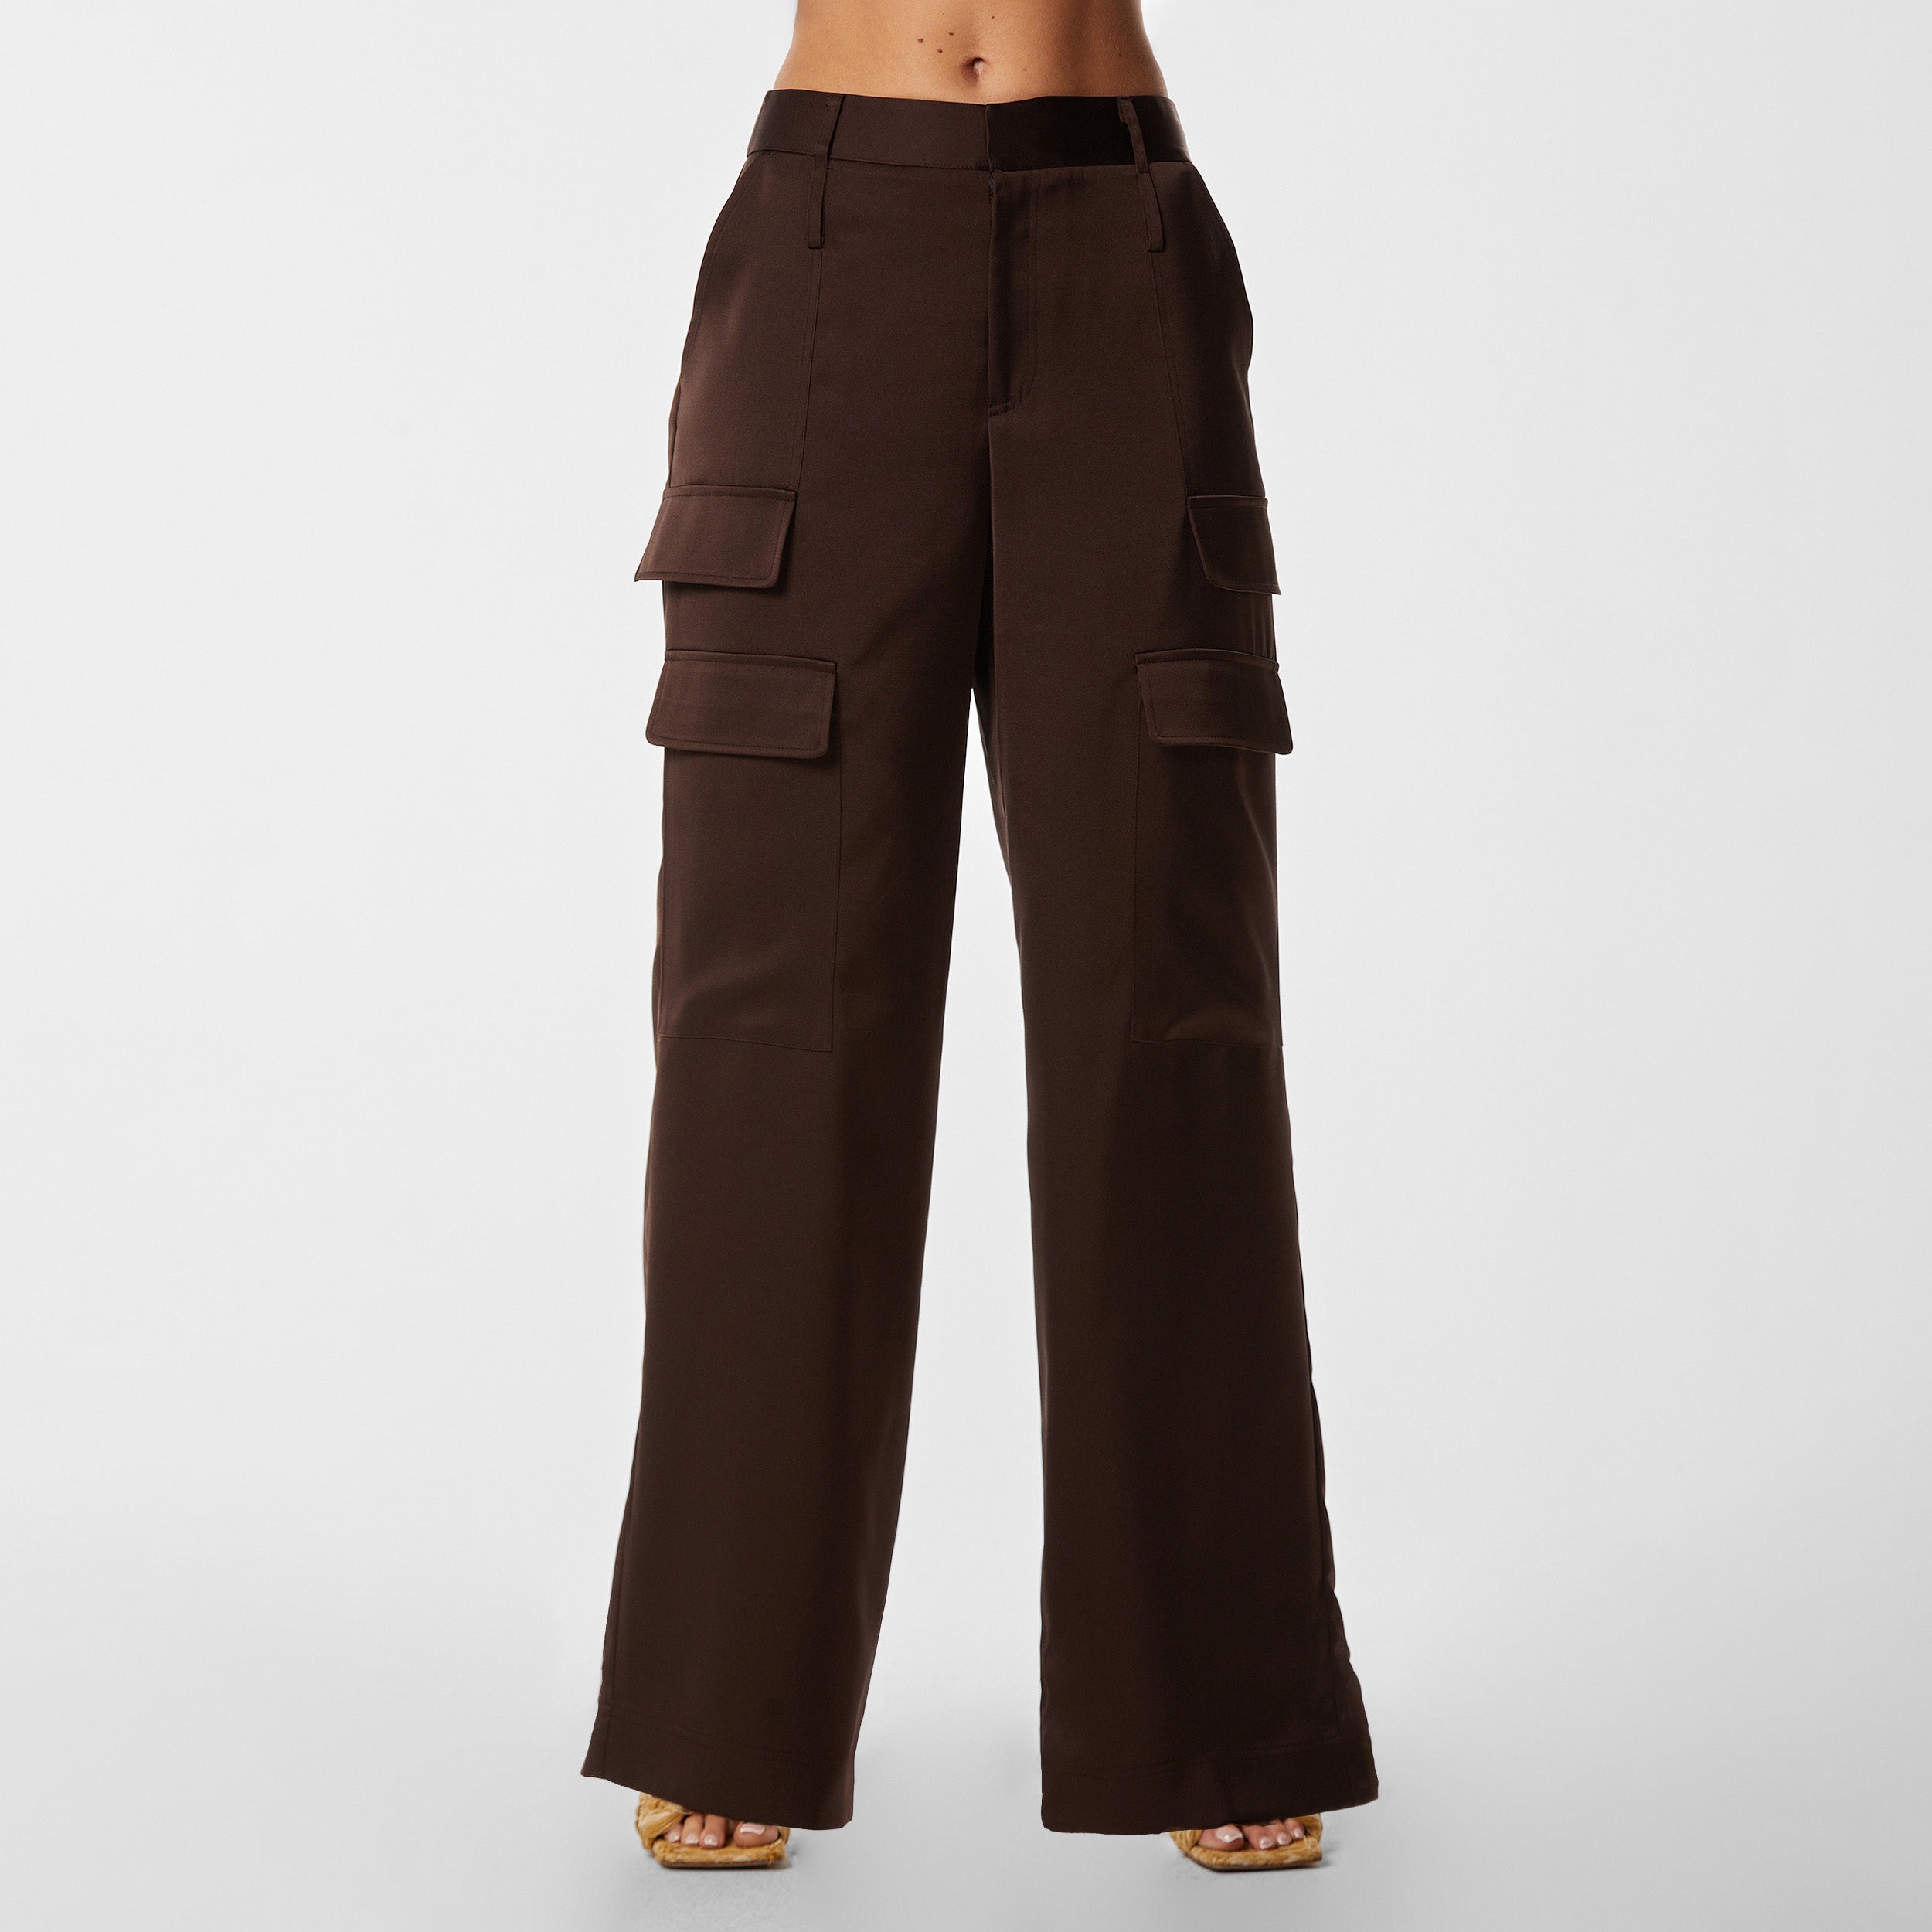 Front view of woman wearing Brown Satin Milan Pant features Mid-rise with side pockets and cargo detail. Luxurious and structured satin-like fabric. 